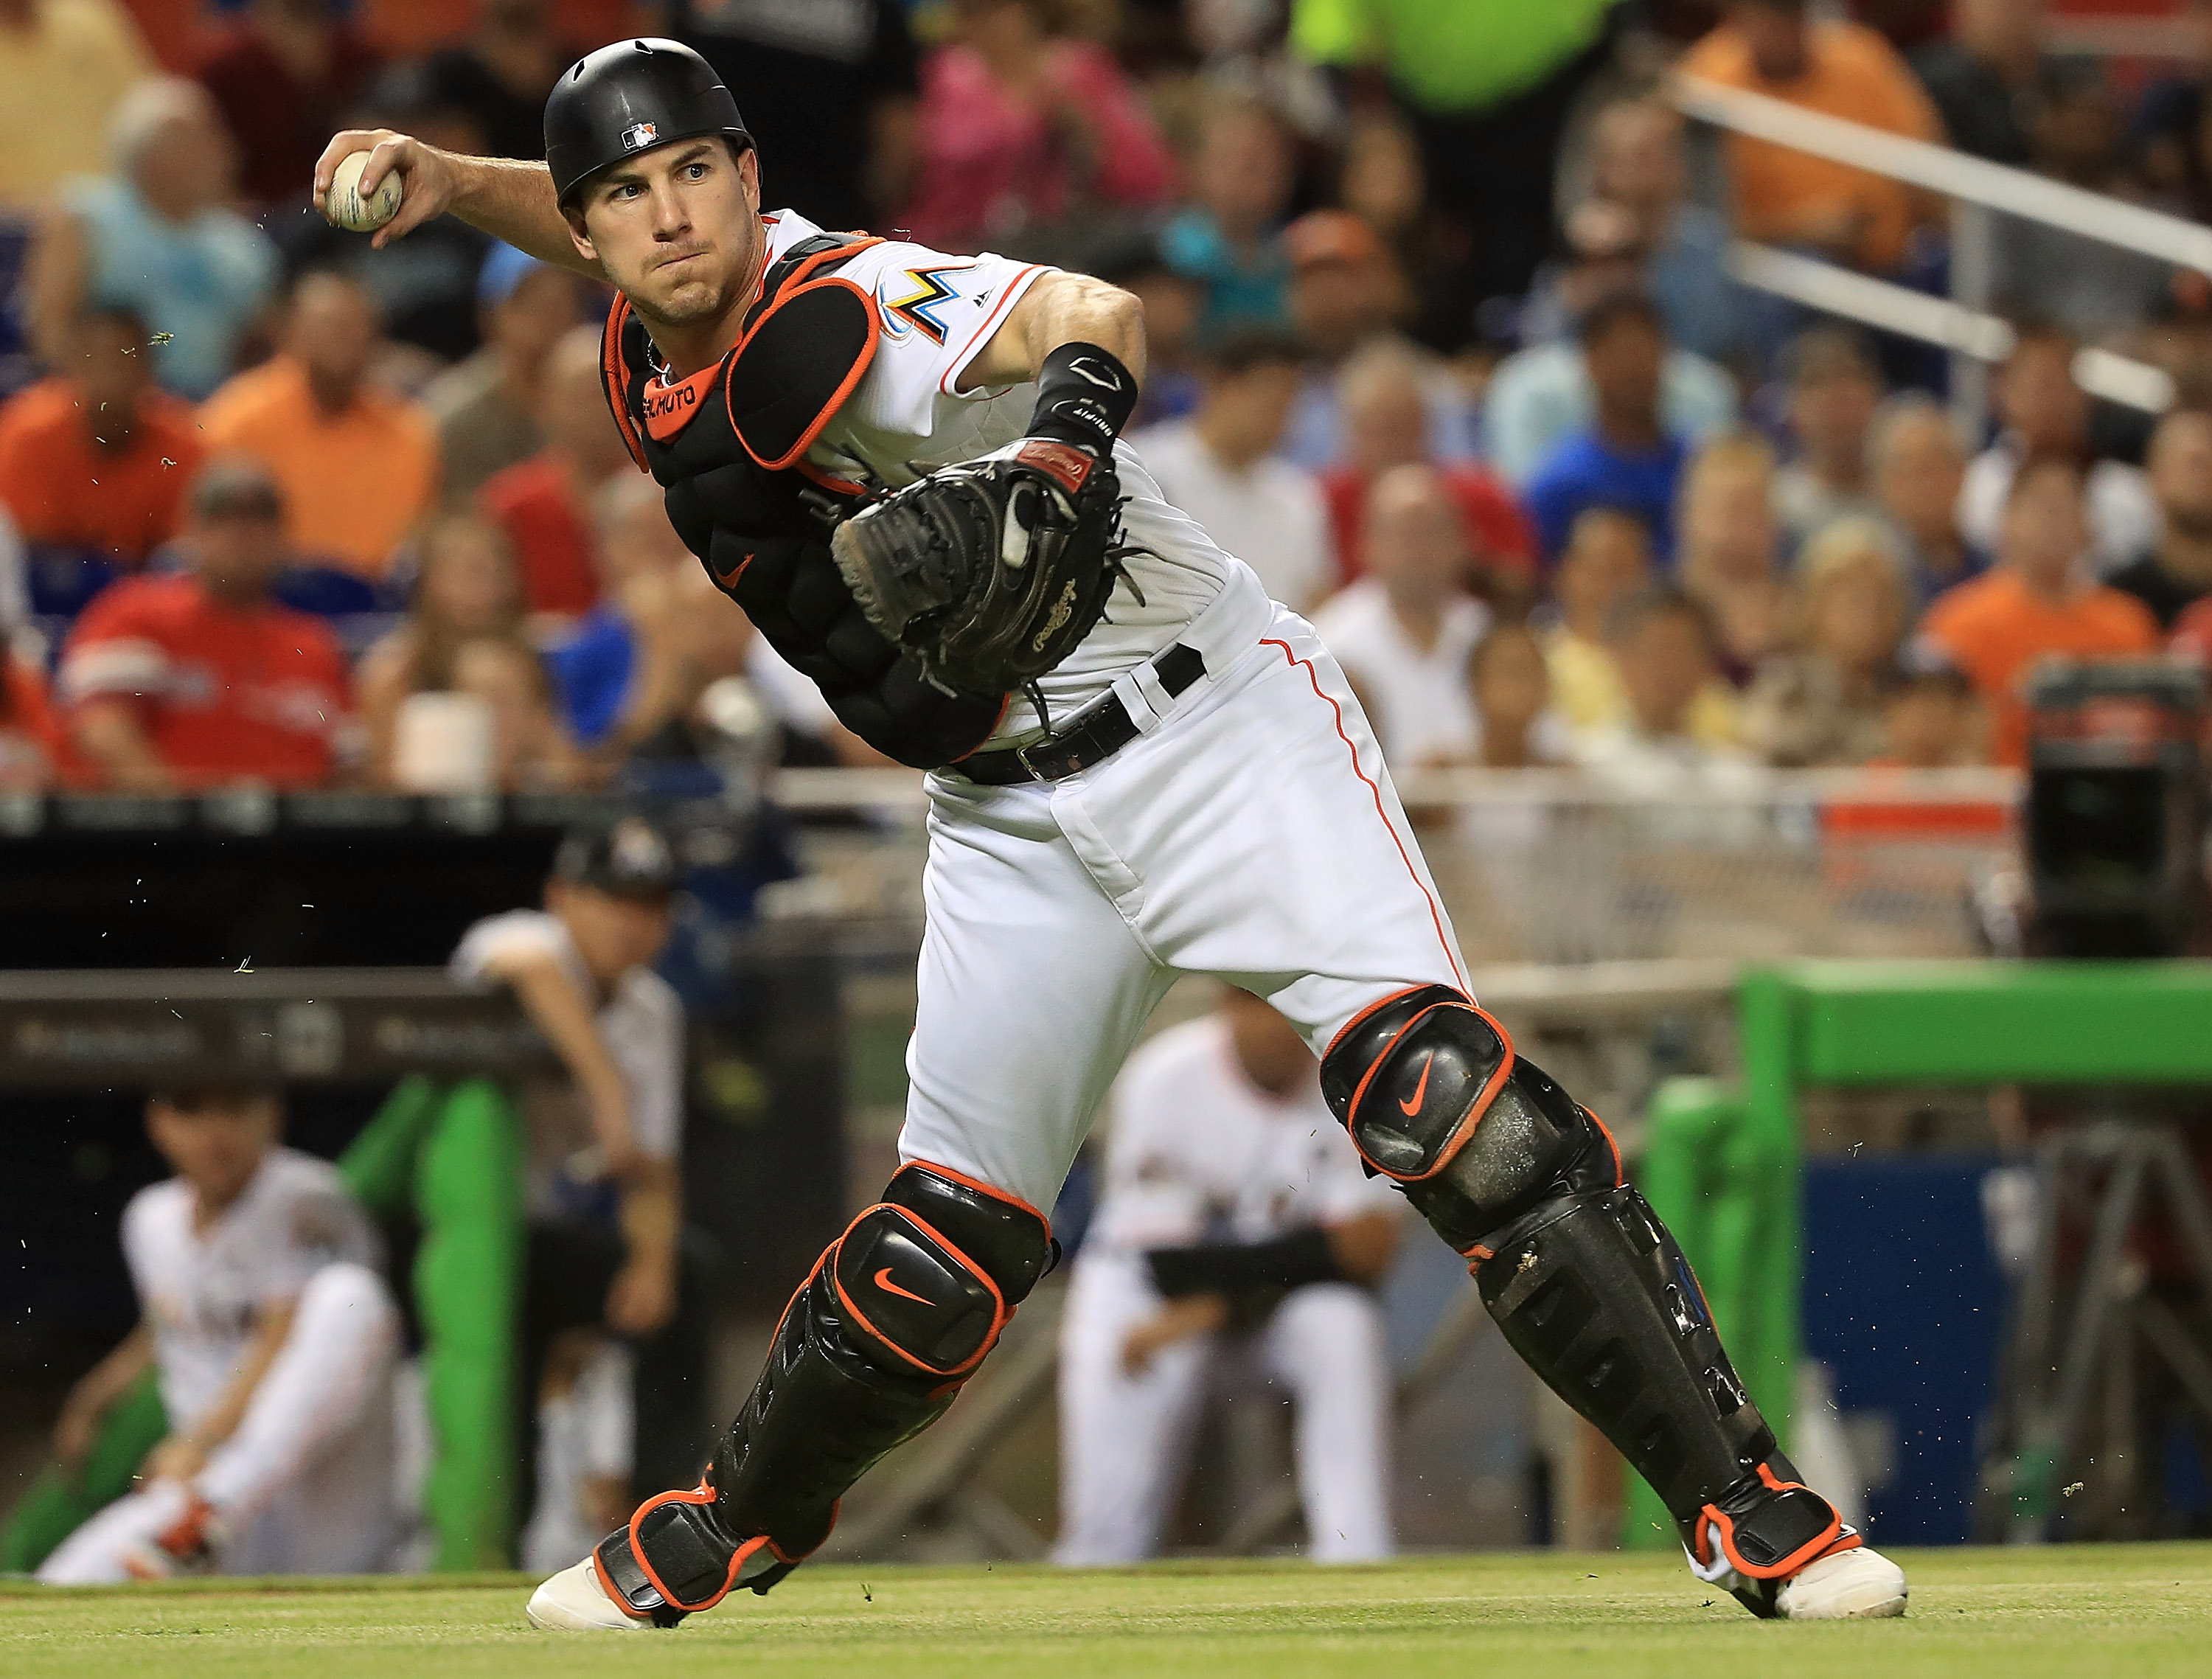 jt realmuto catching